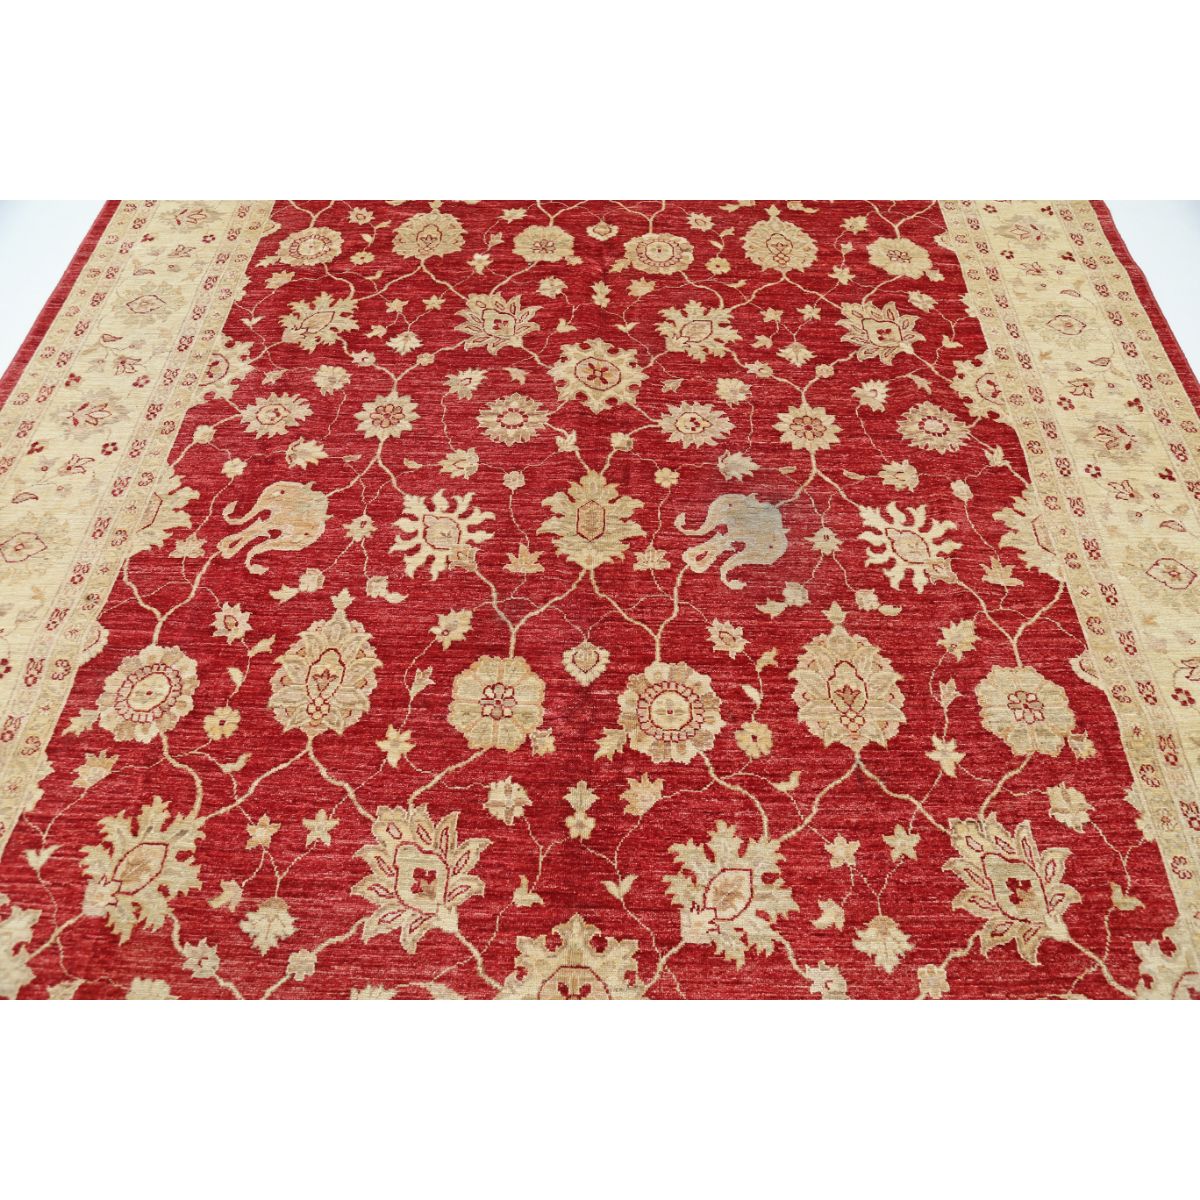 Ziegler 7'10" X 10'3" Wool Hand-Knotted Rug